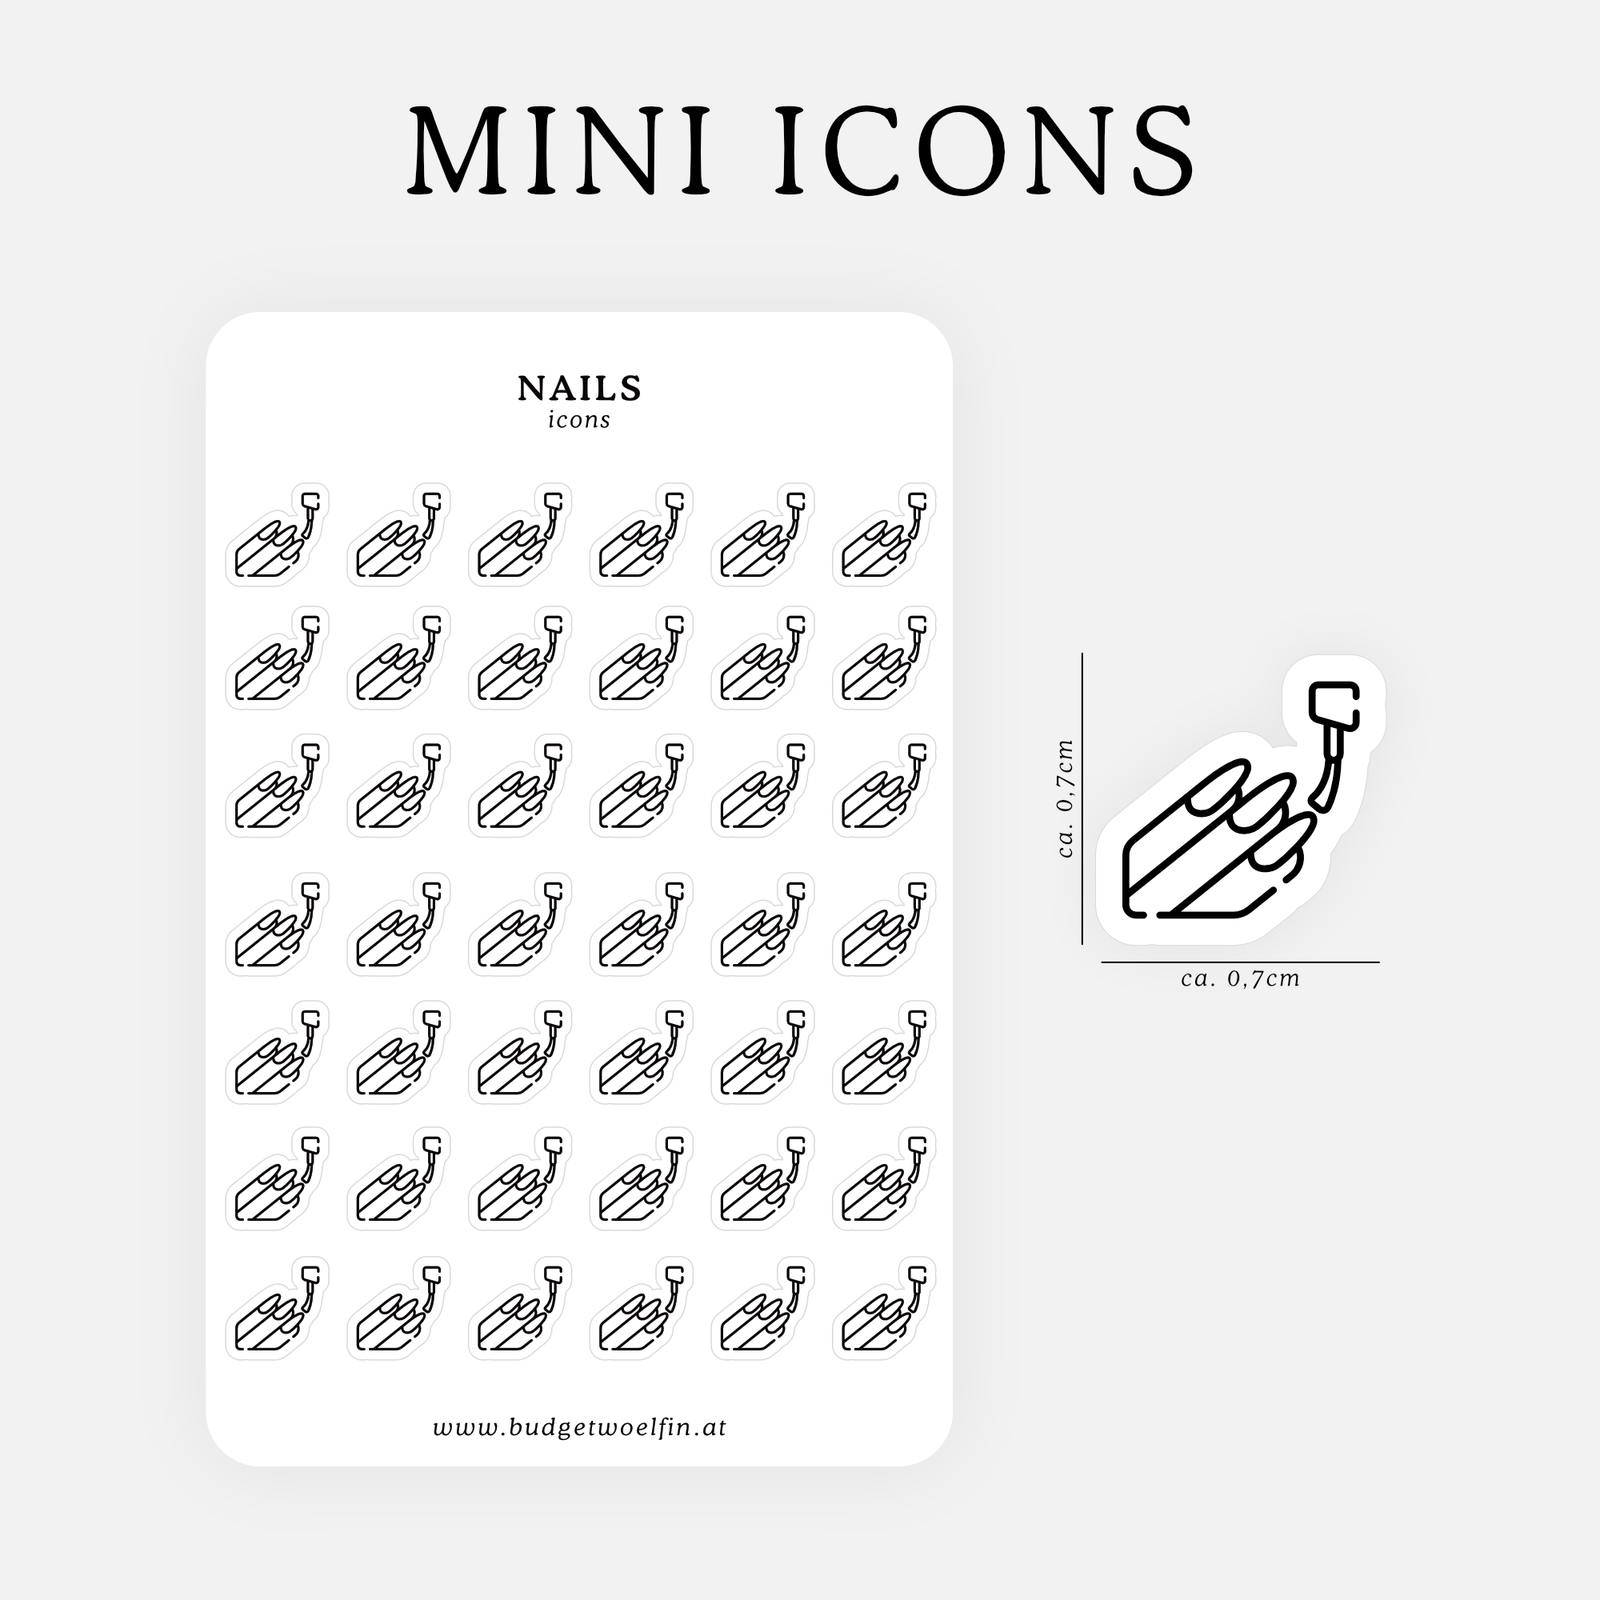 Planer Mini Icons NAILS Sticker Sheet - BudgetWoelfin